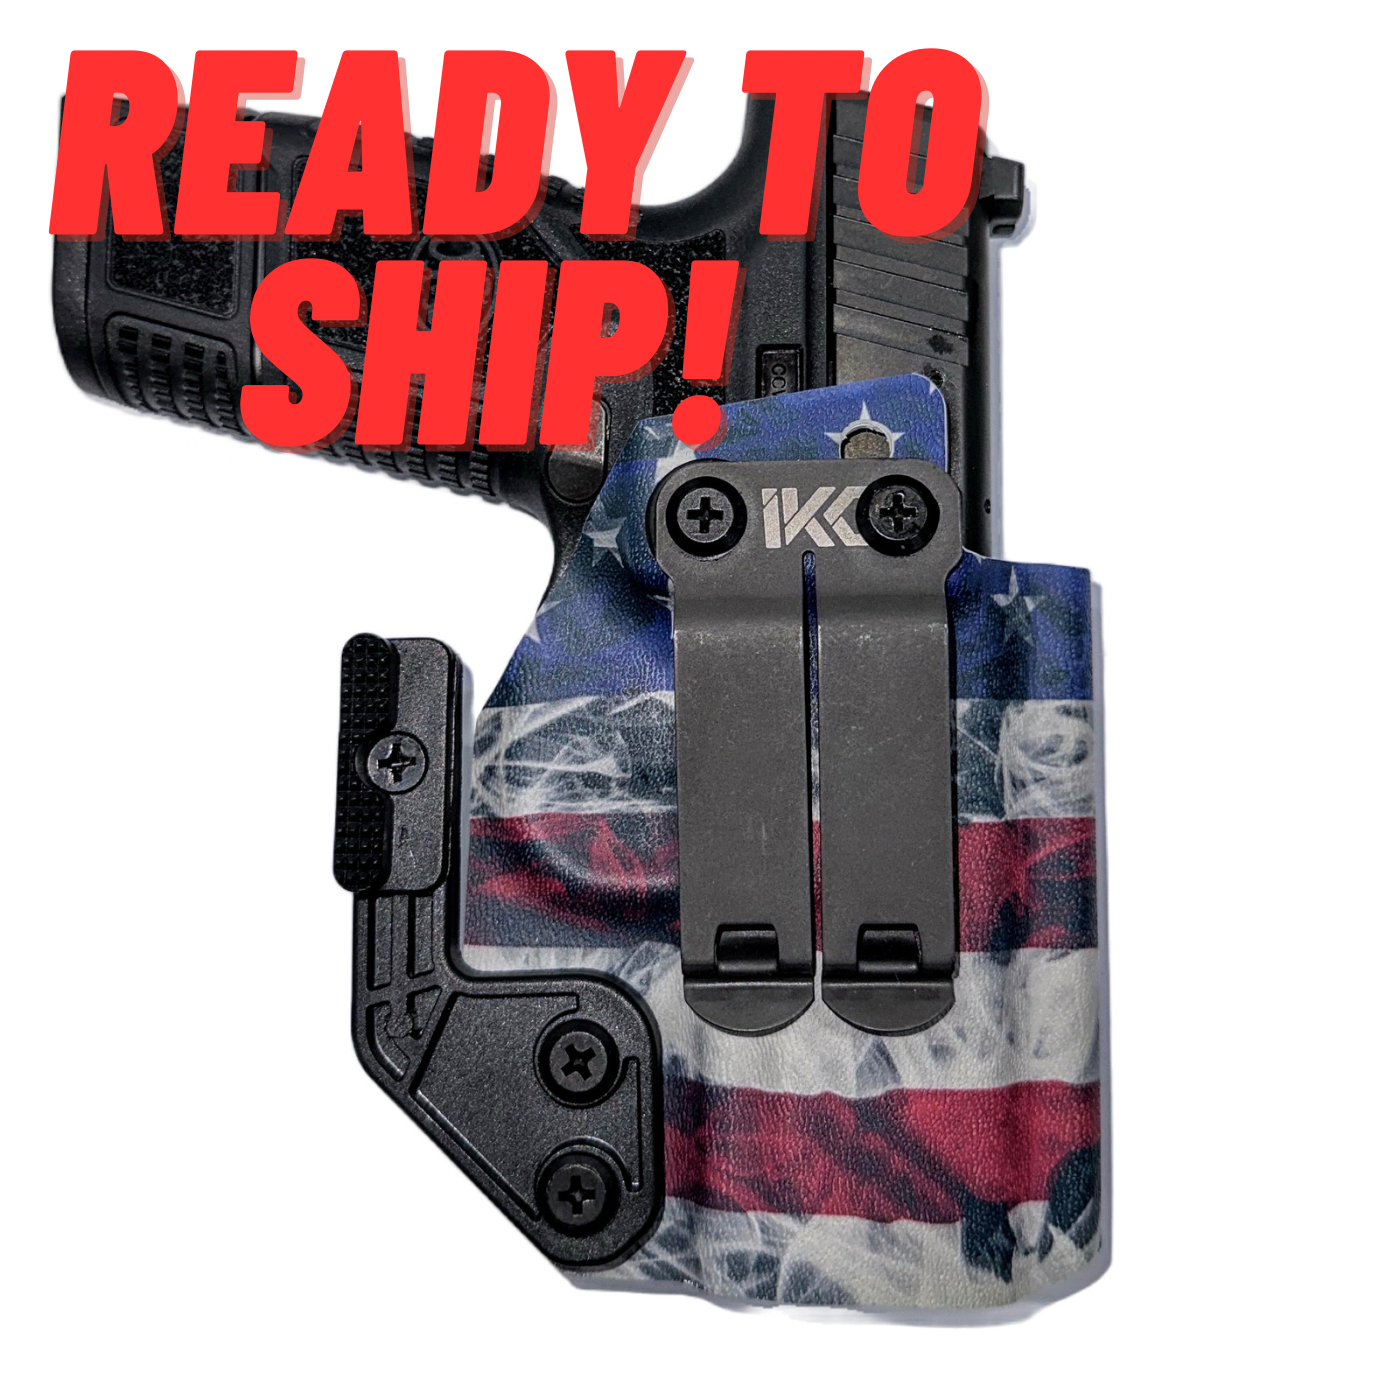 Kydex Manila - LV Supreme Inspired dual custom print IWB holster CUSTOM  Prints by KYDEX MANILA KM holsters just redifined the word Customize..  the FIRST and ONLY Kydex Holster maker in the